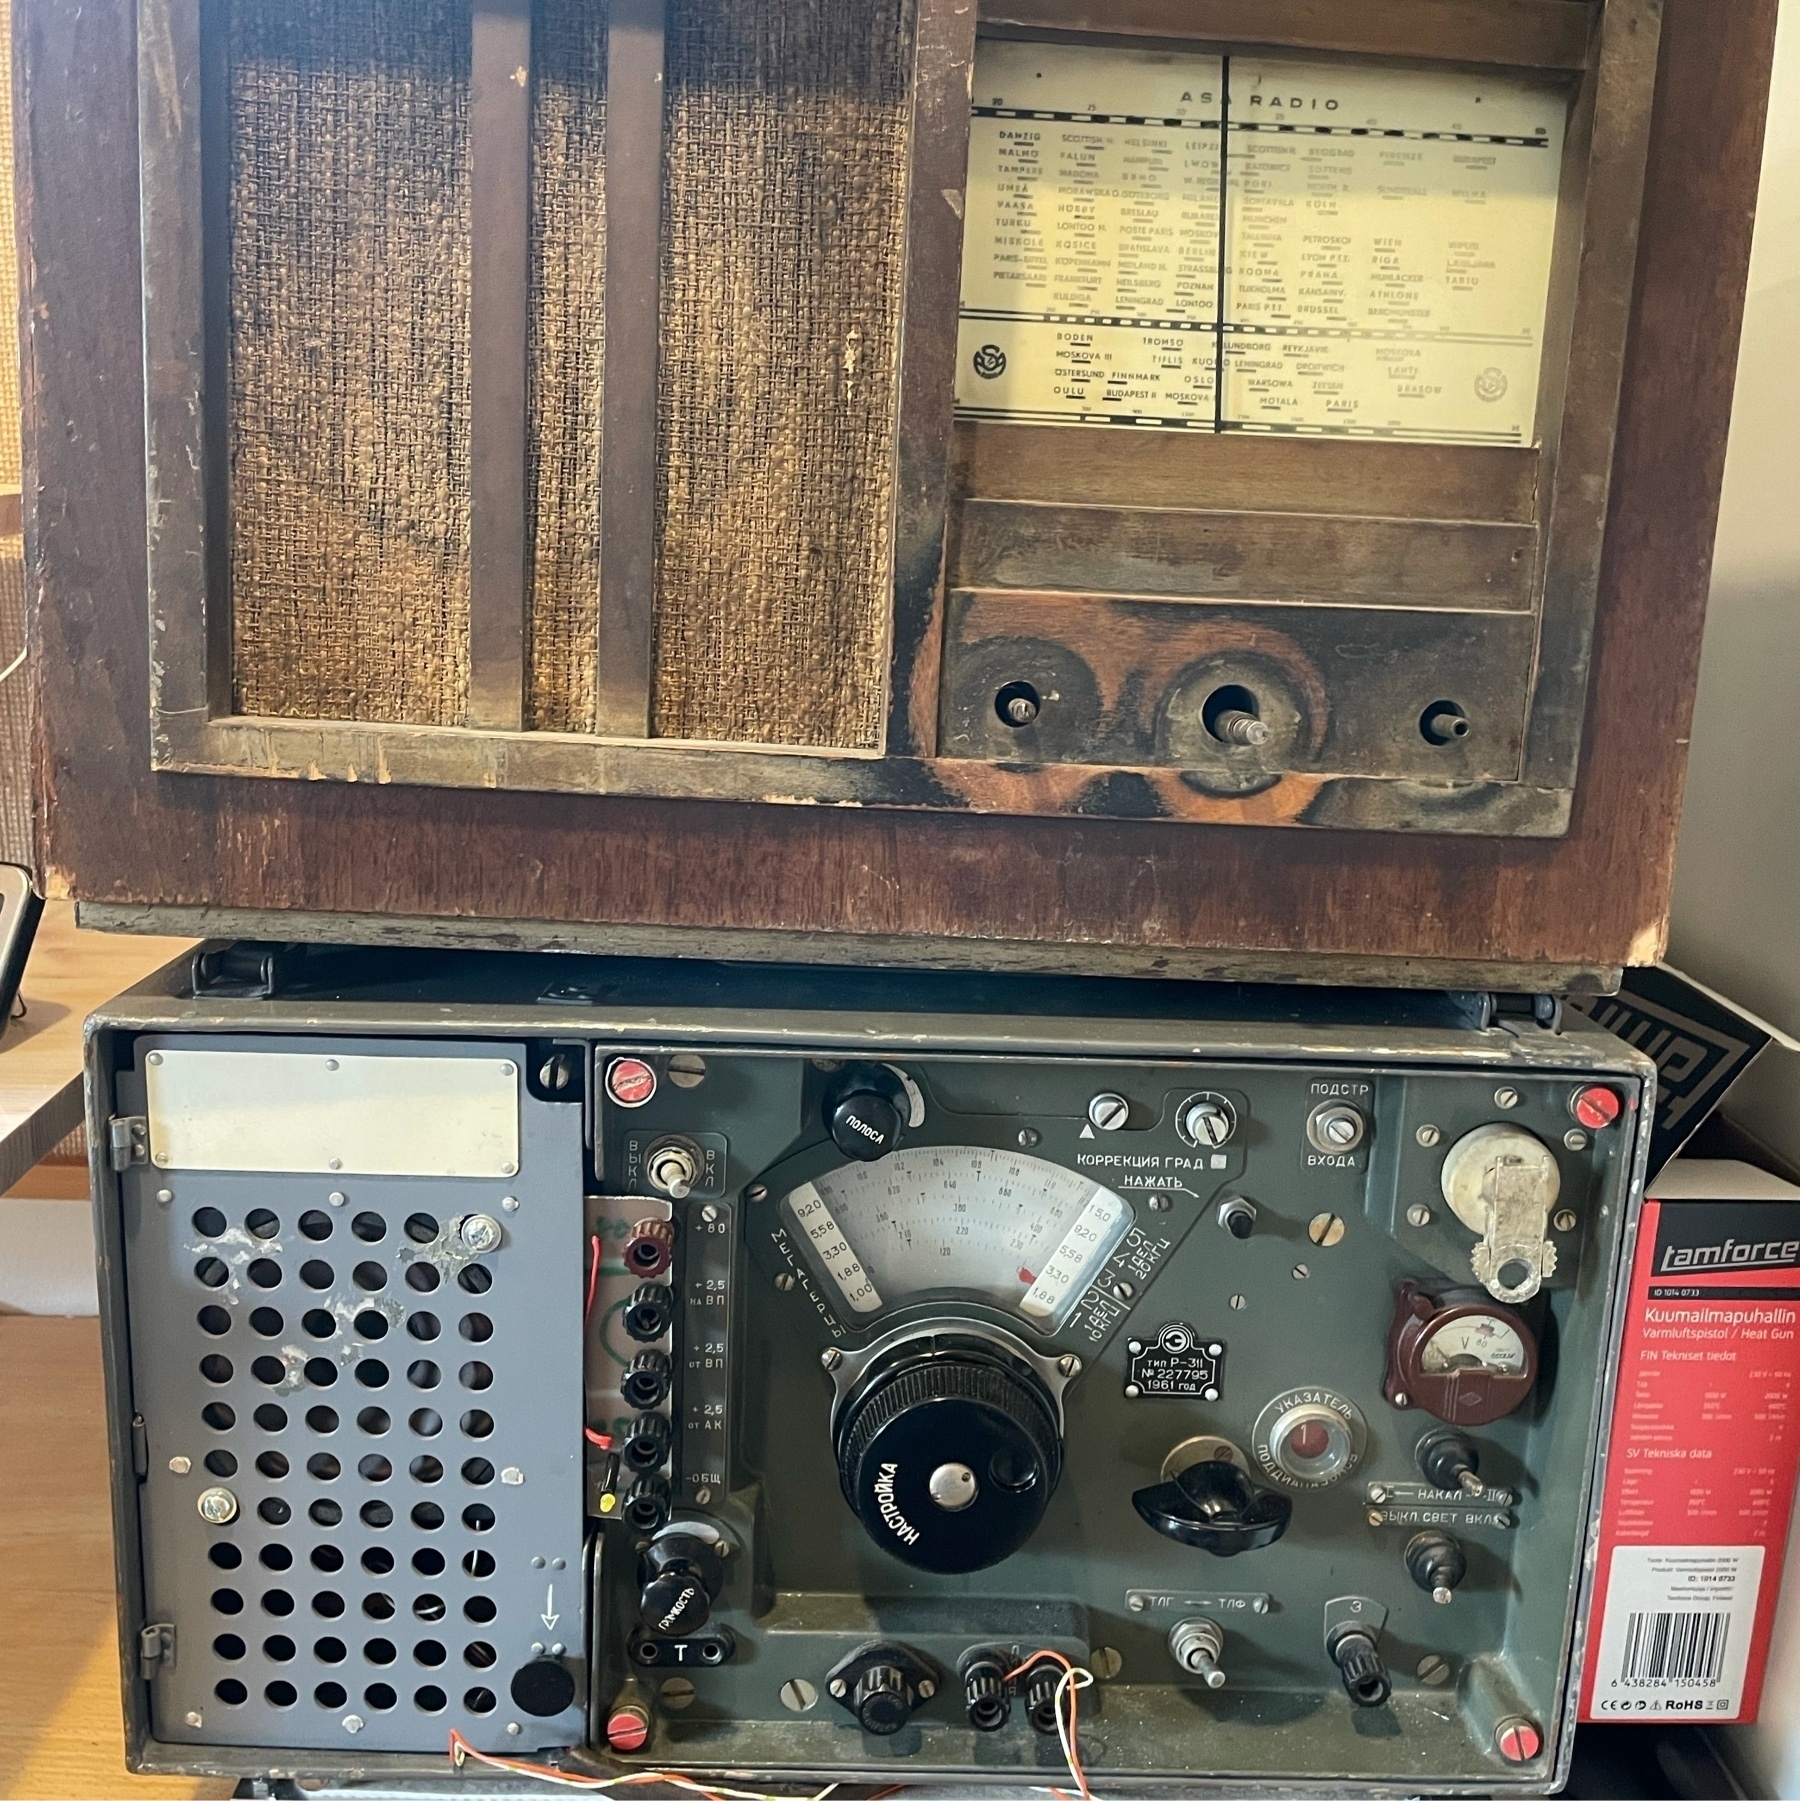 two old radios on top of each other, lower one with cyrillic texts in controllers